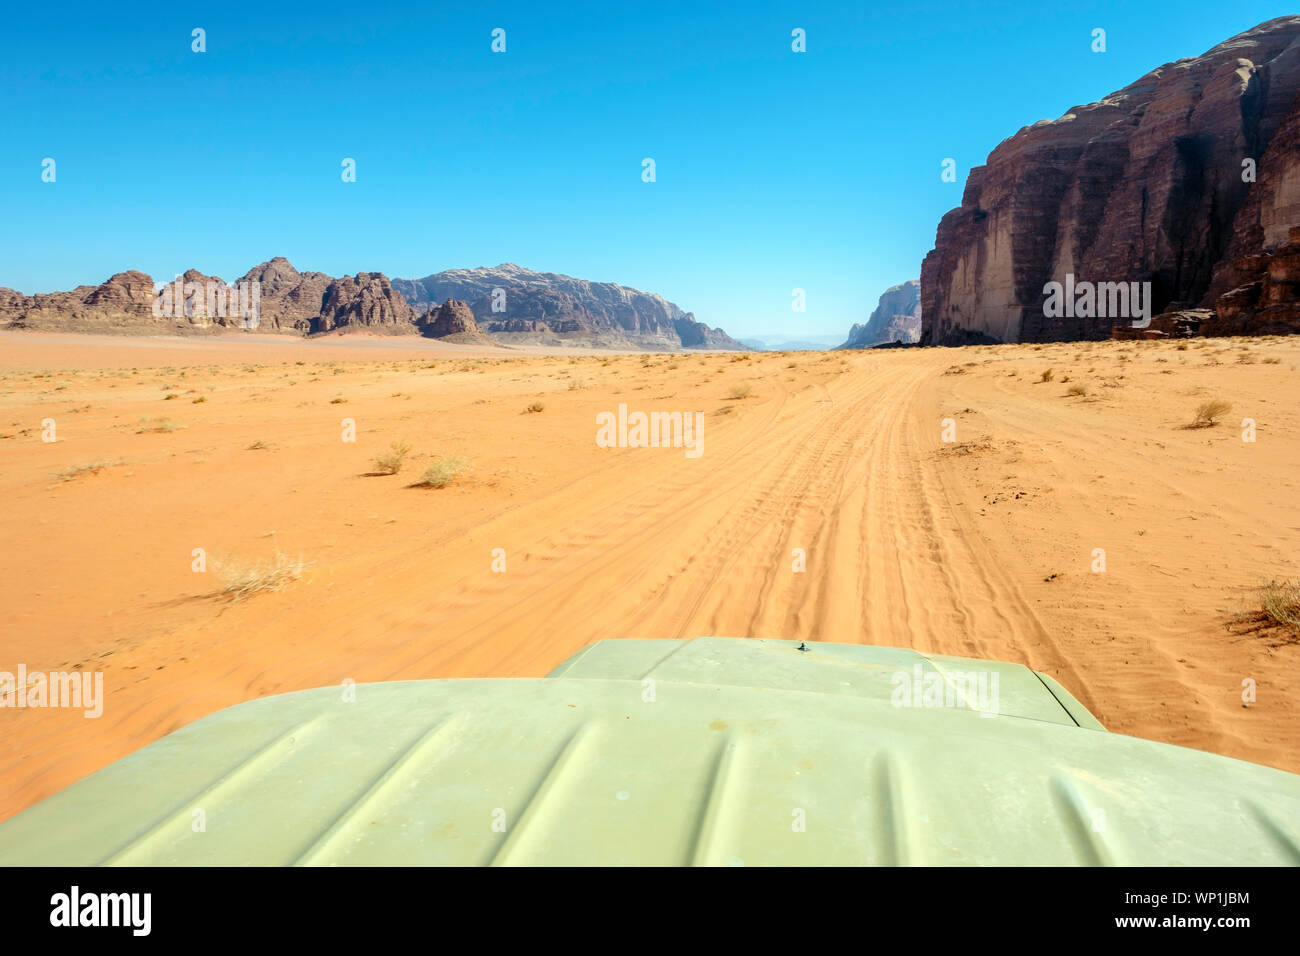 Jordan, Aqaba Governorate, Wadi Rum. Wadi Rum Protected Area, UNESCO World Heritage Site. View from the room of a four wheel drive jeep in desert land Stock Photo